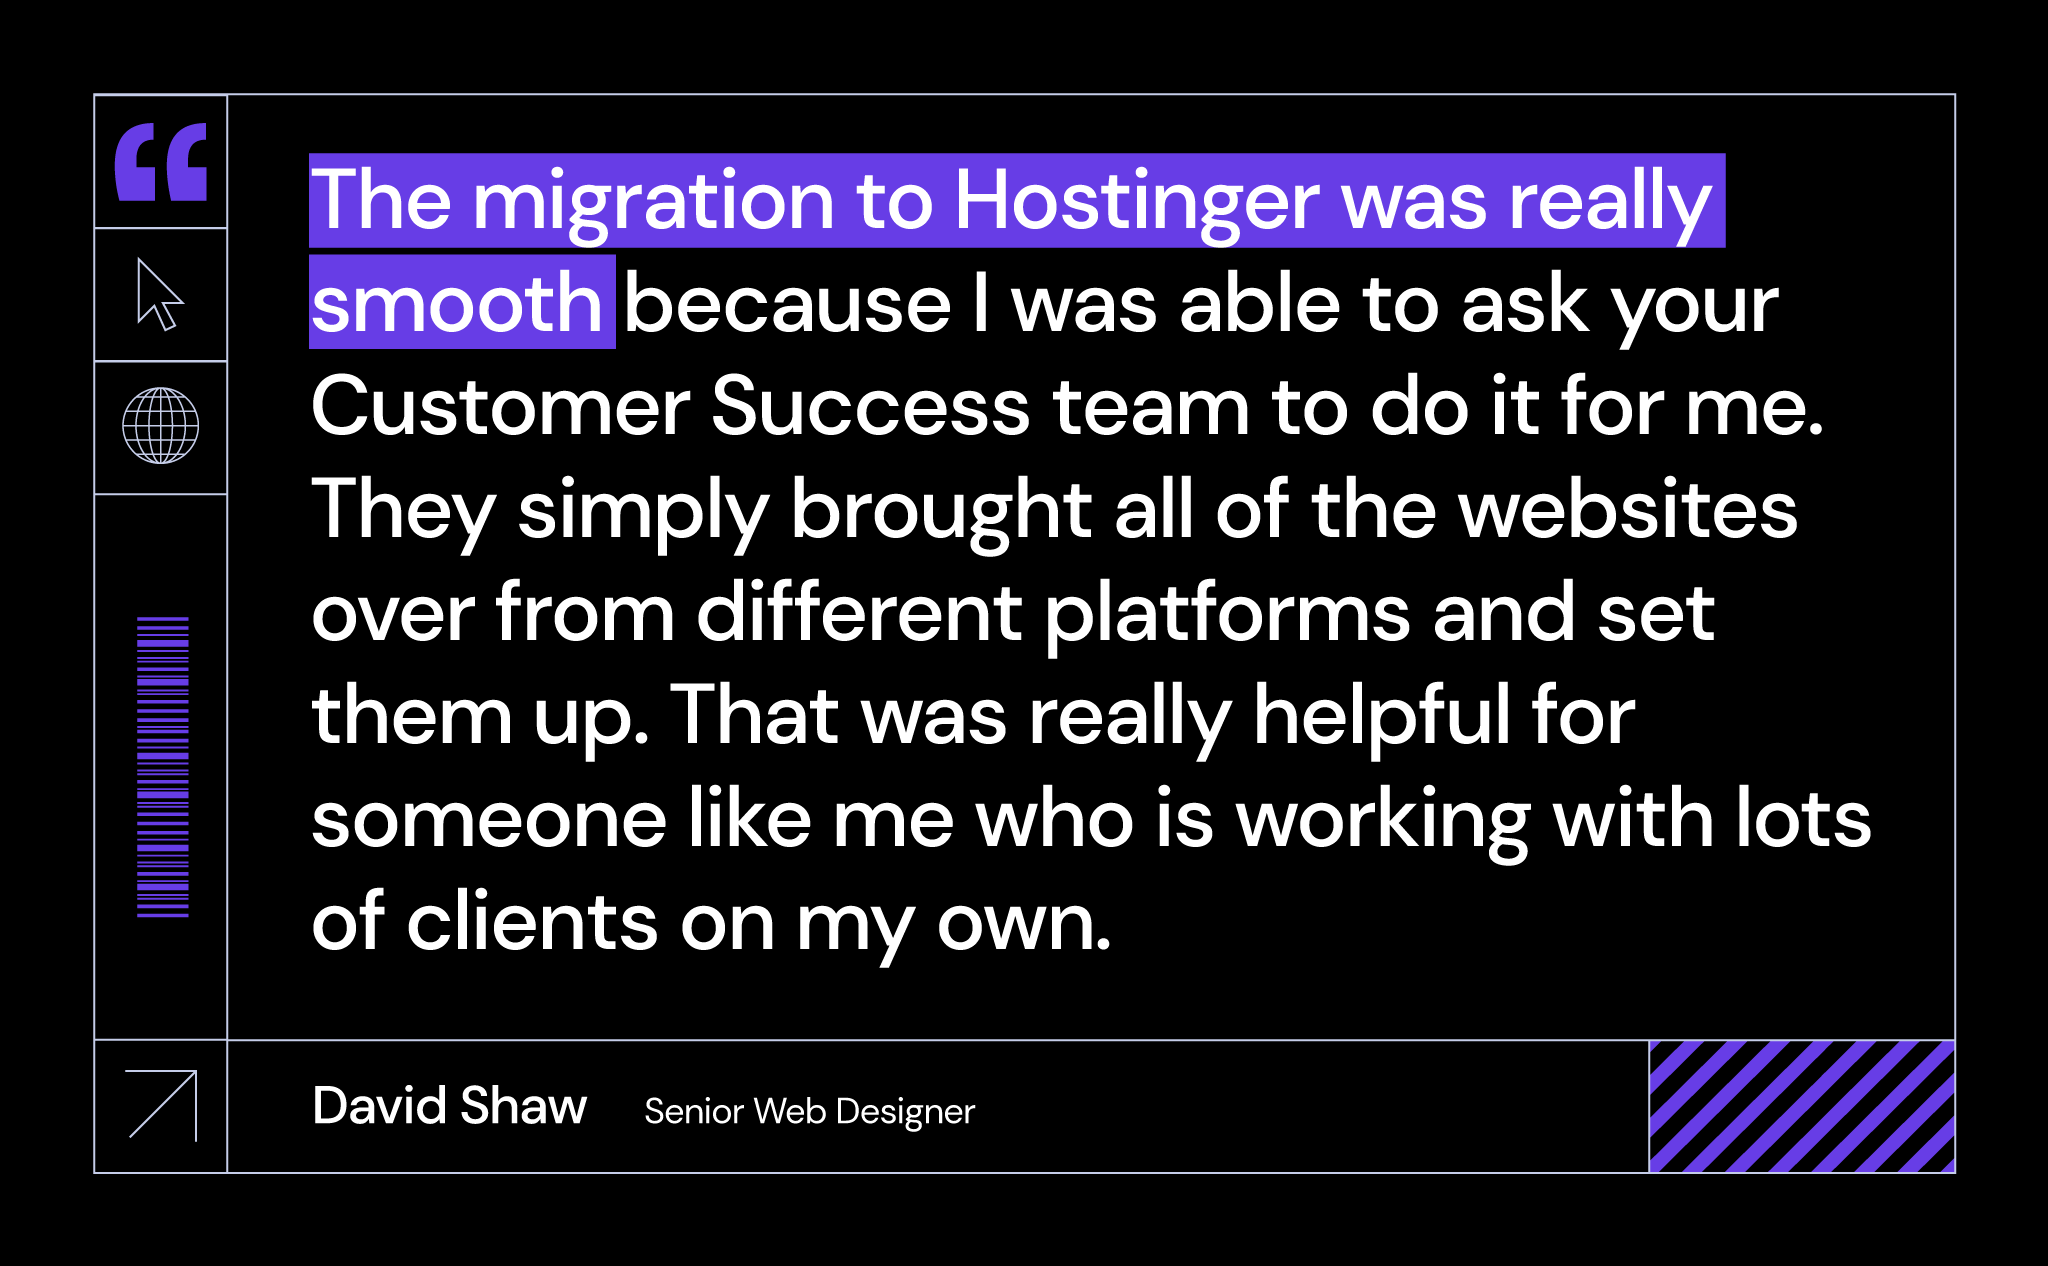 David Shaw of Creative Graphics UK shares his positive migration experience to Hostinger's services